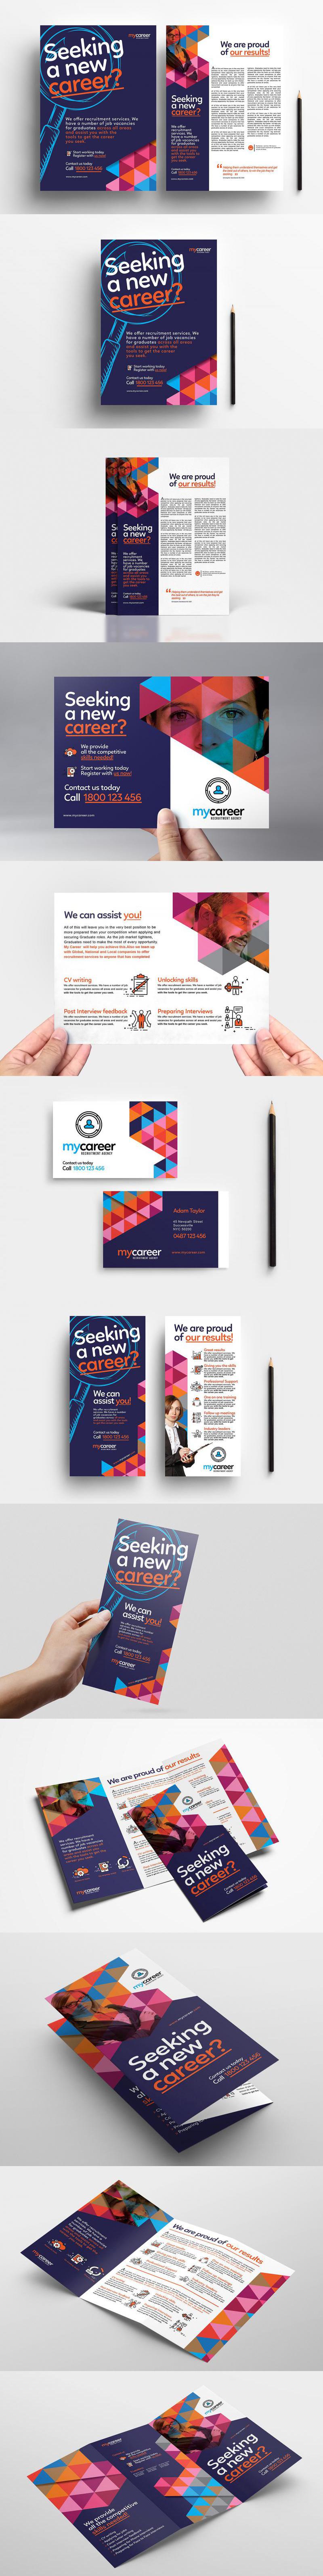 Recruitment Agency Templates Pack